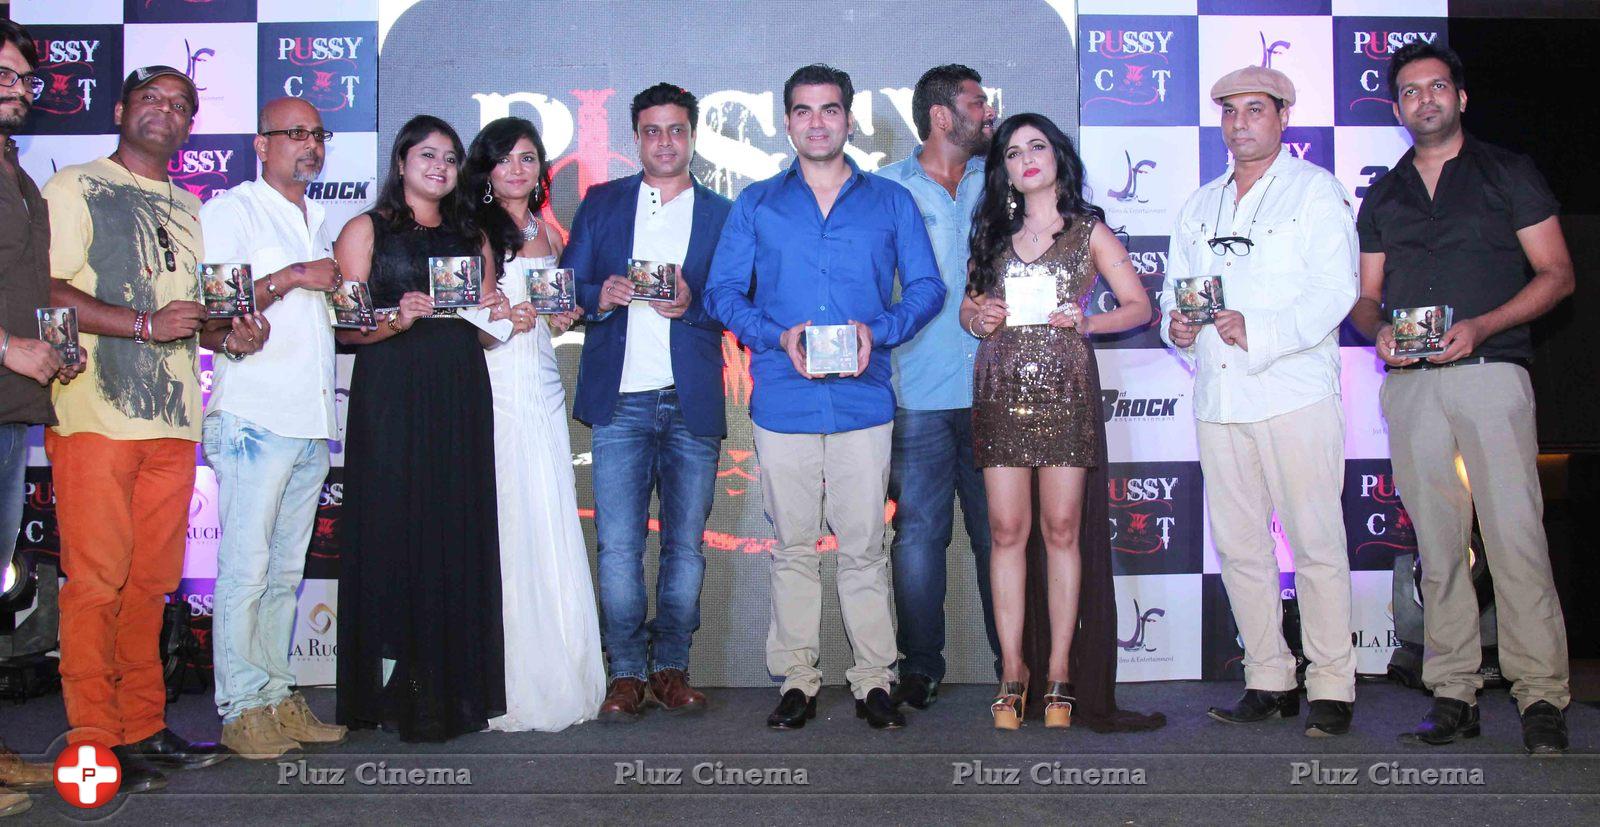 Arbaaz Khan at the Launch of Jeet Films Photos | Picture 1127634